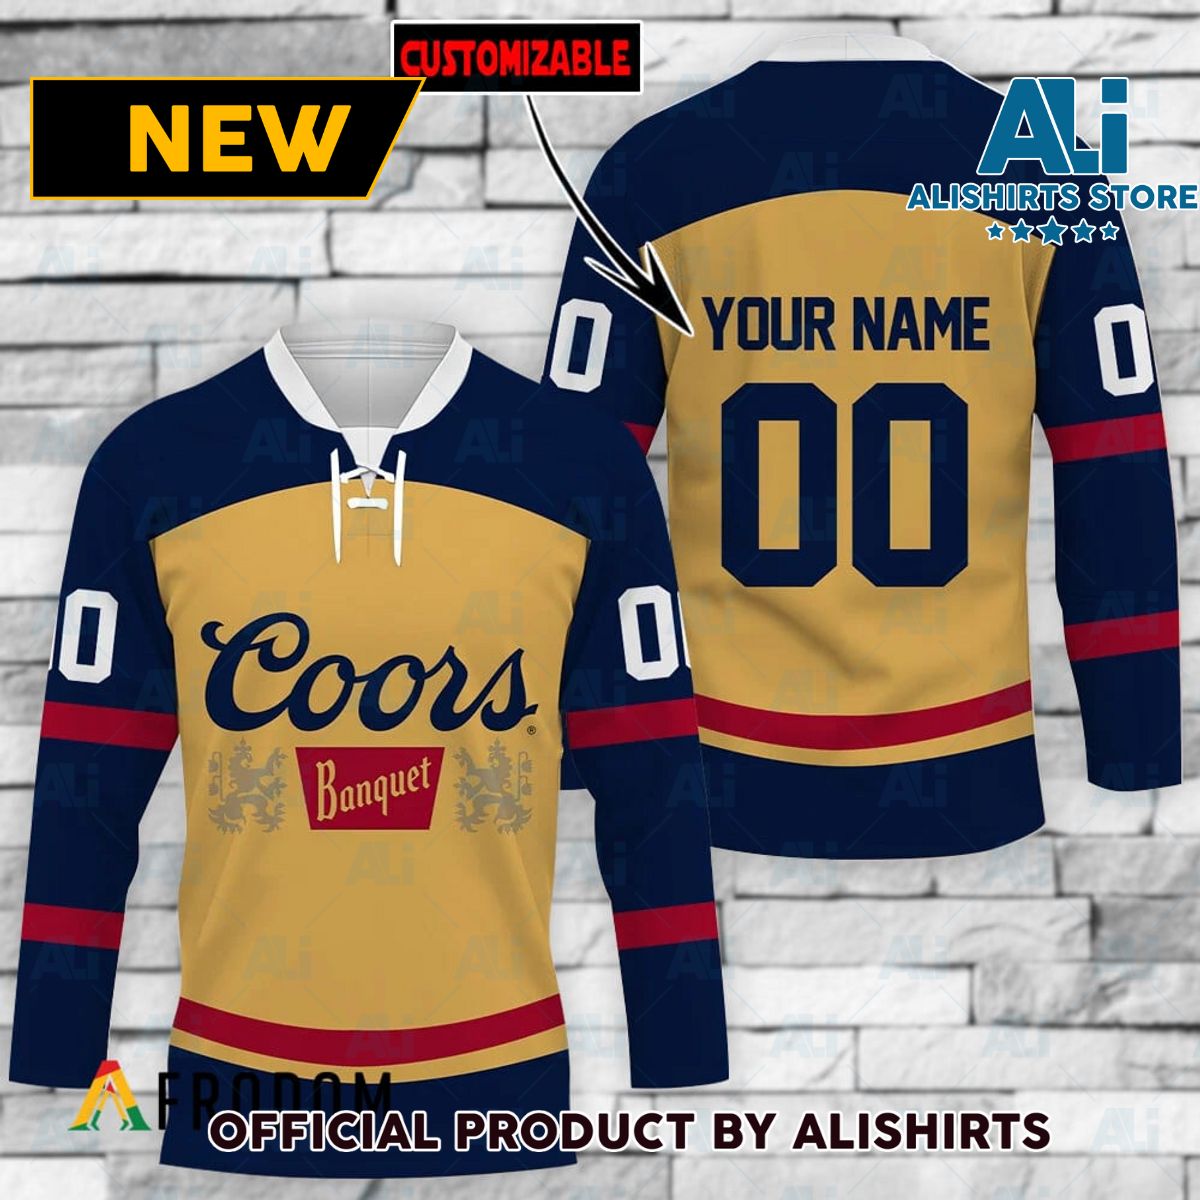 Personalized Coors Banquet Hockey Jersey